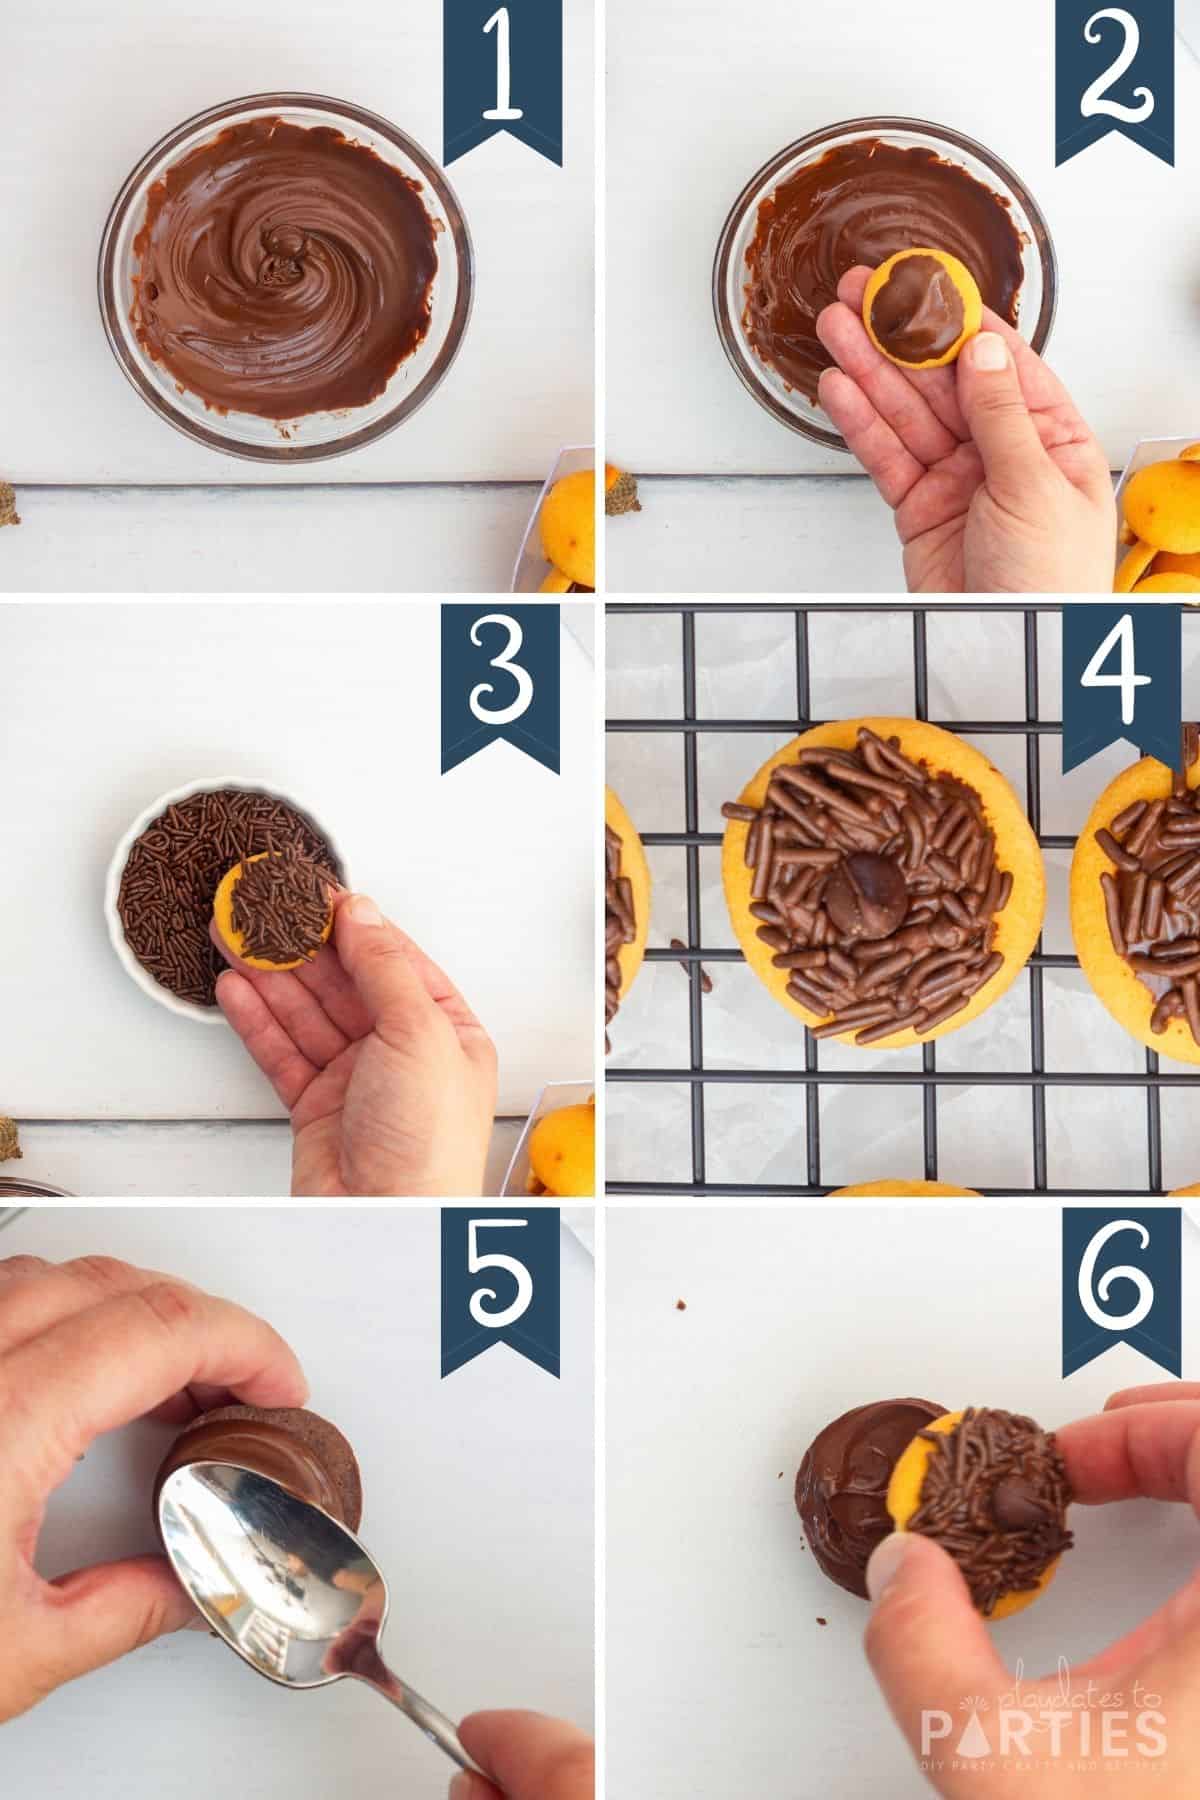 Steps 1-6 showing how to make acorn treats with nilla wafers and brownie bites.